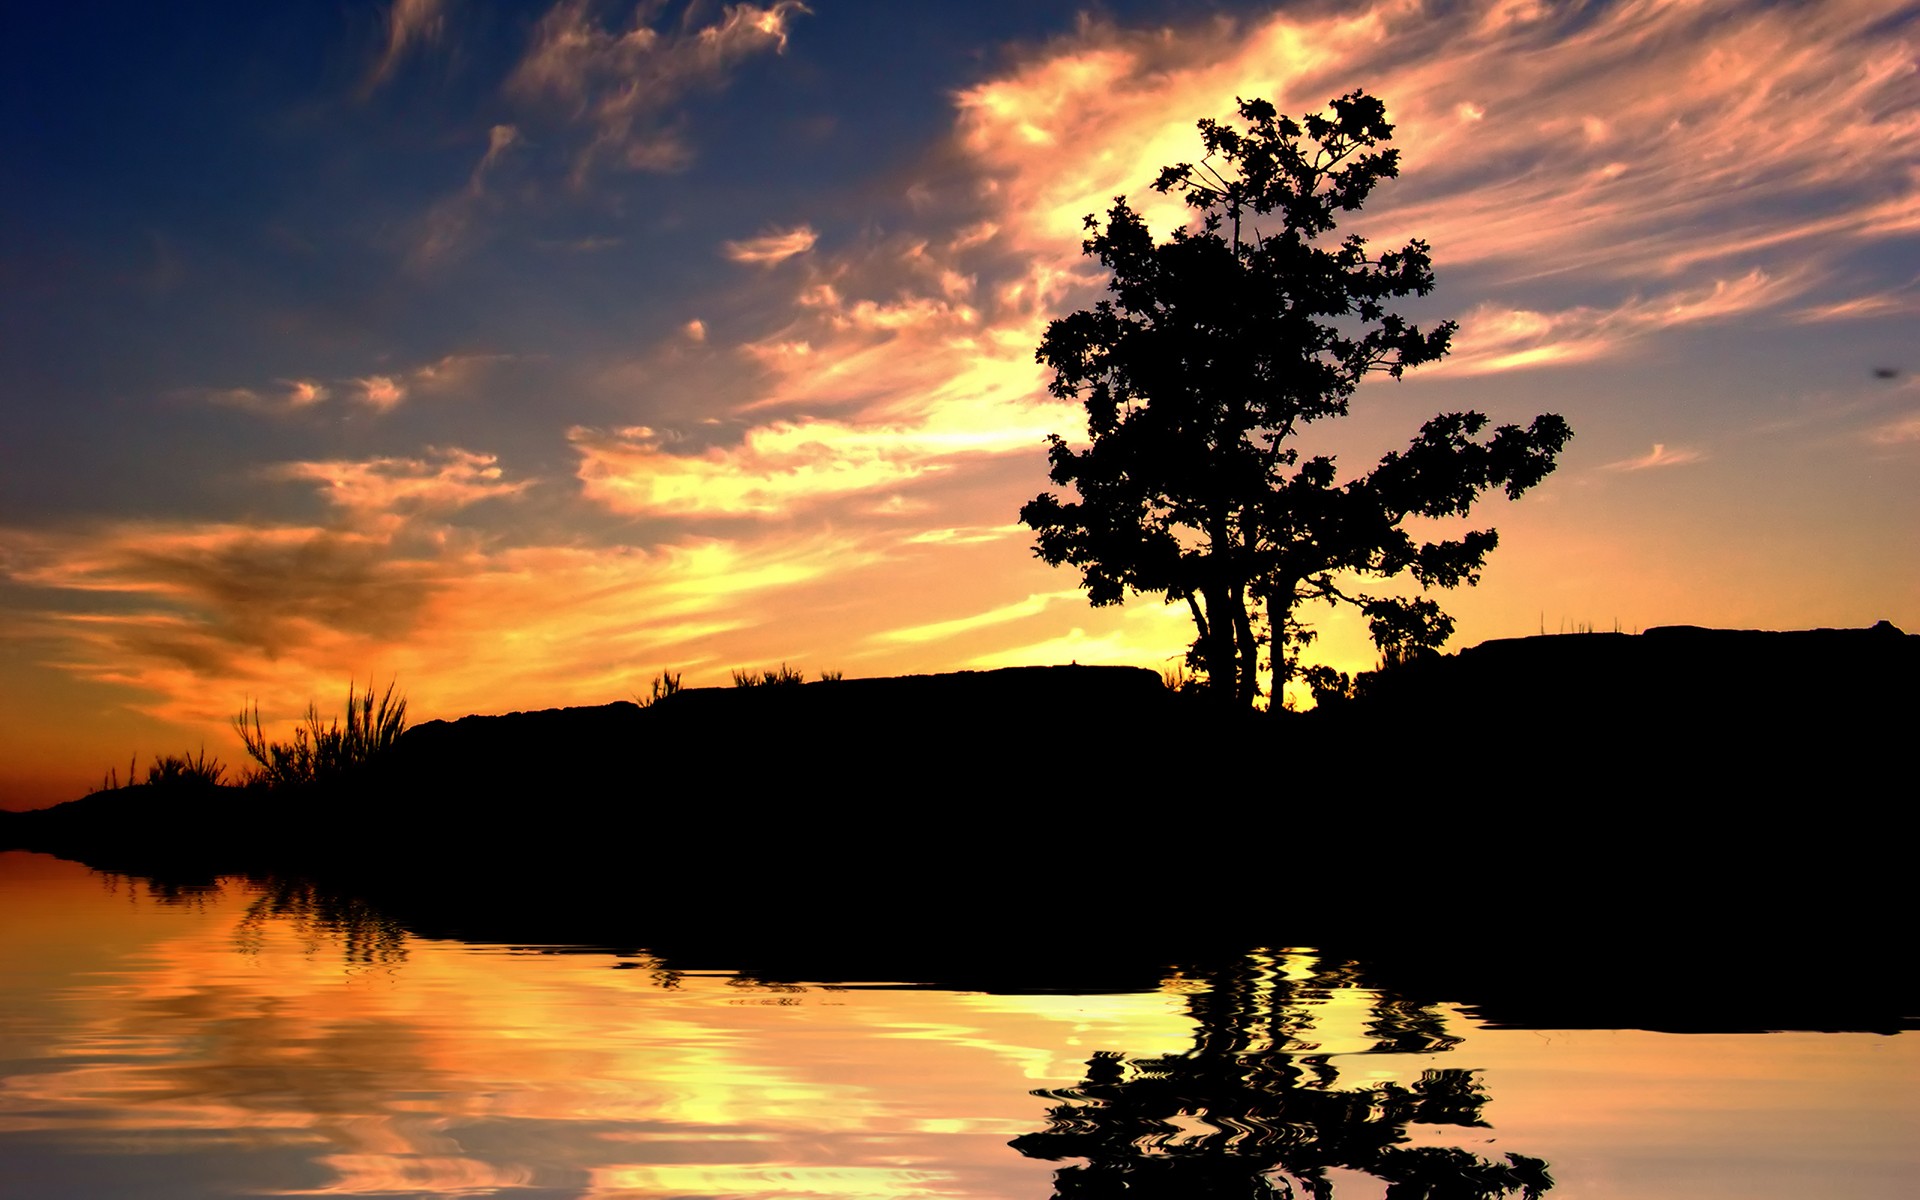 General 1920x1200 sunset nature water reflection sky dusk outdoors trees low light sunlight